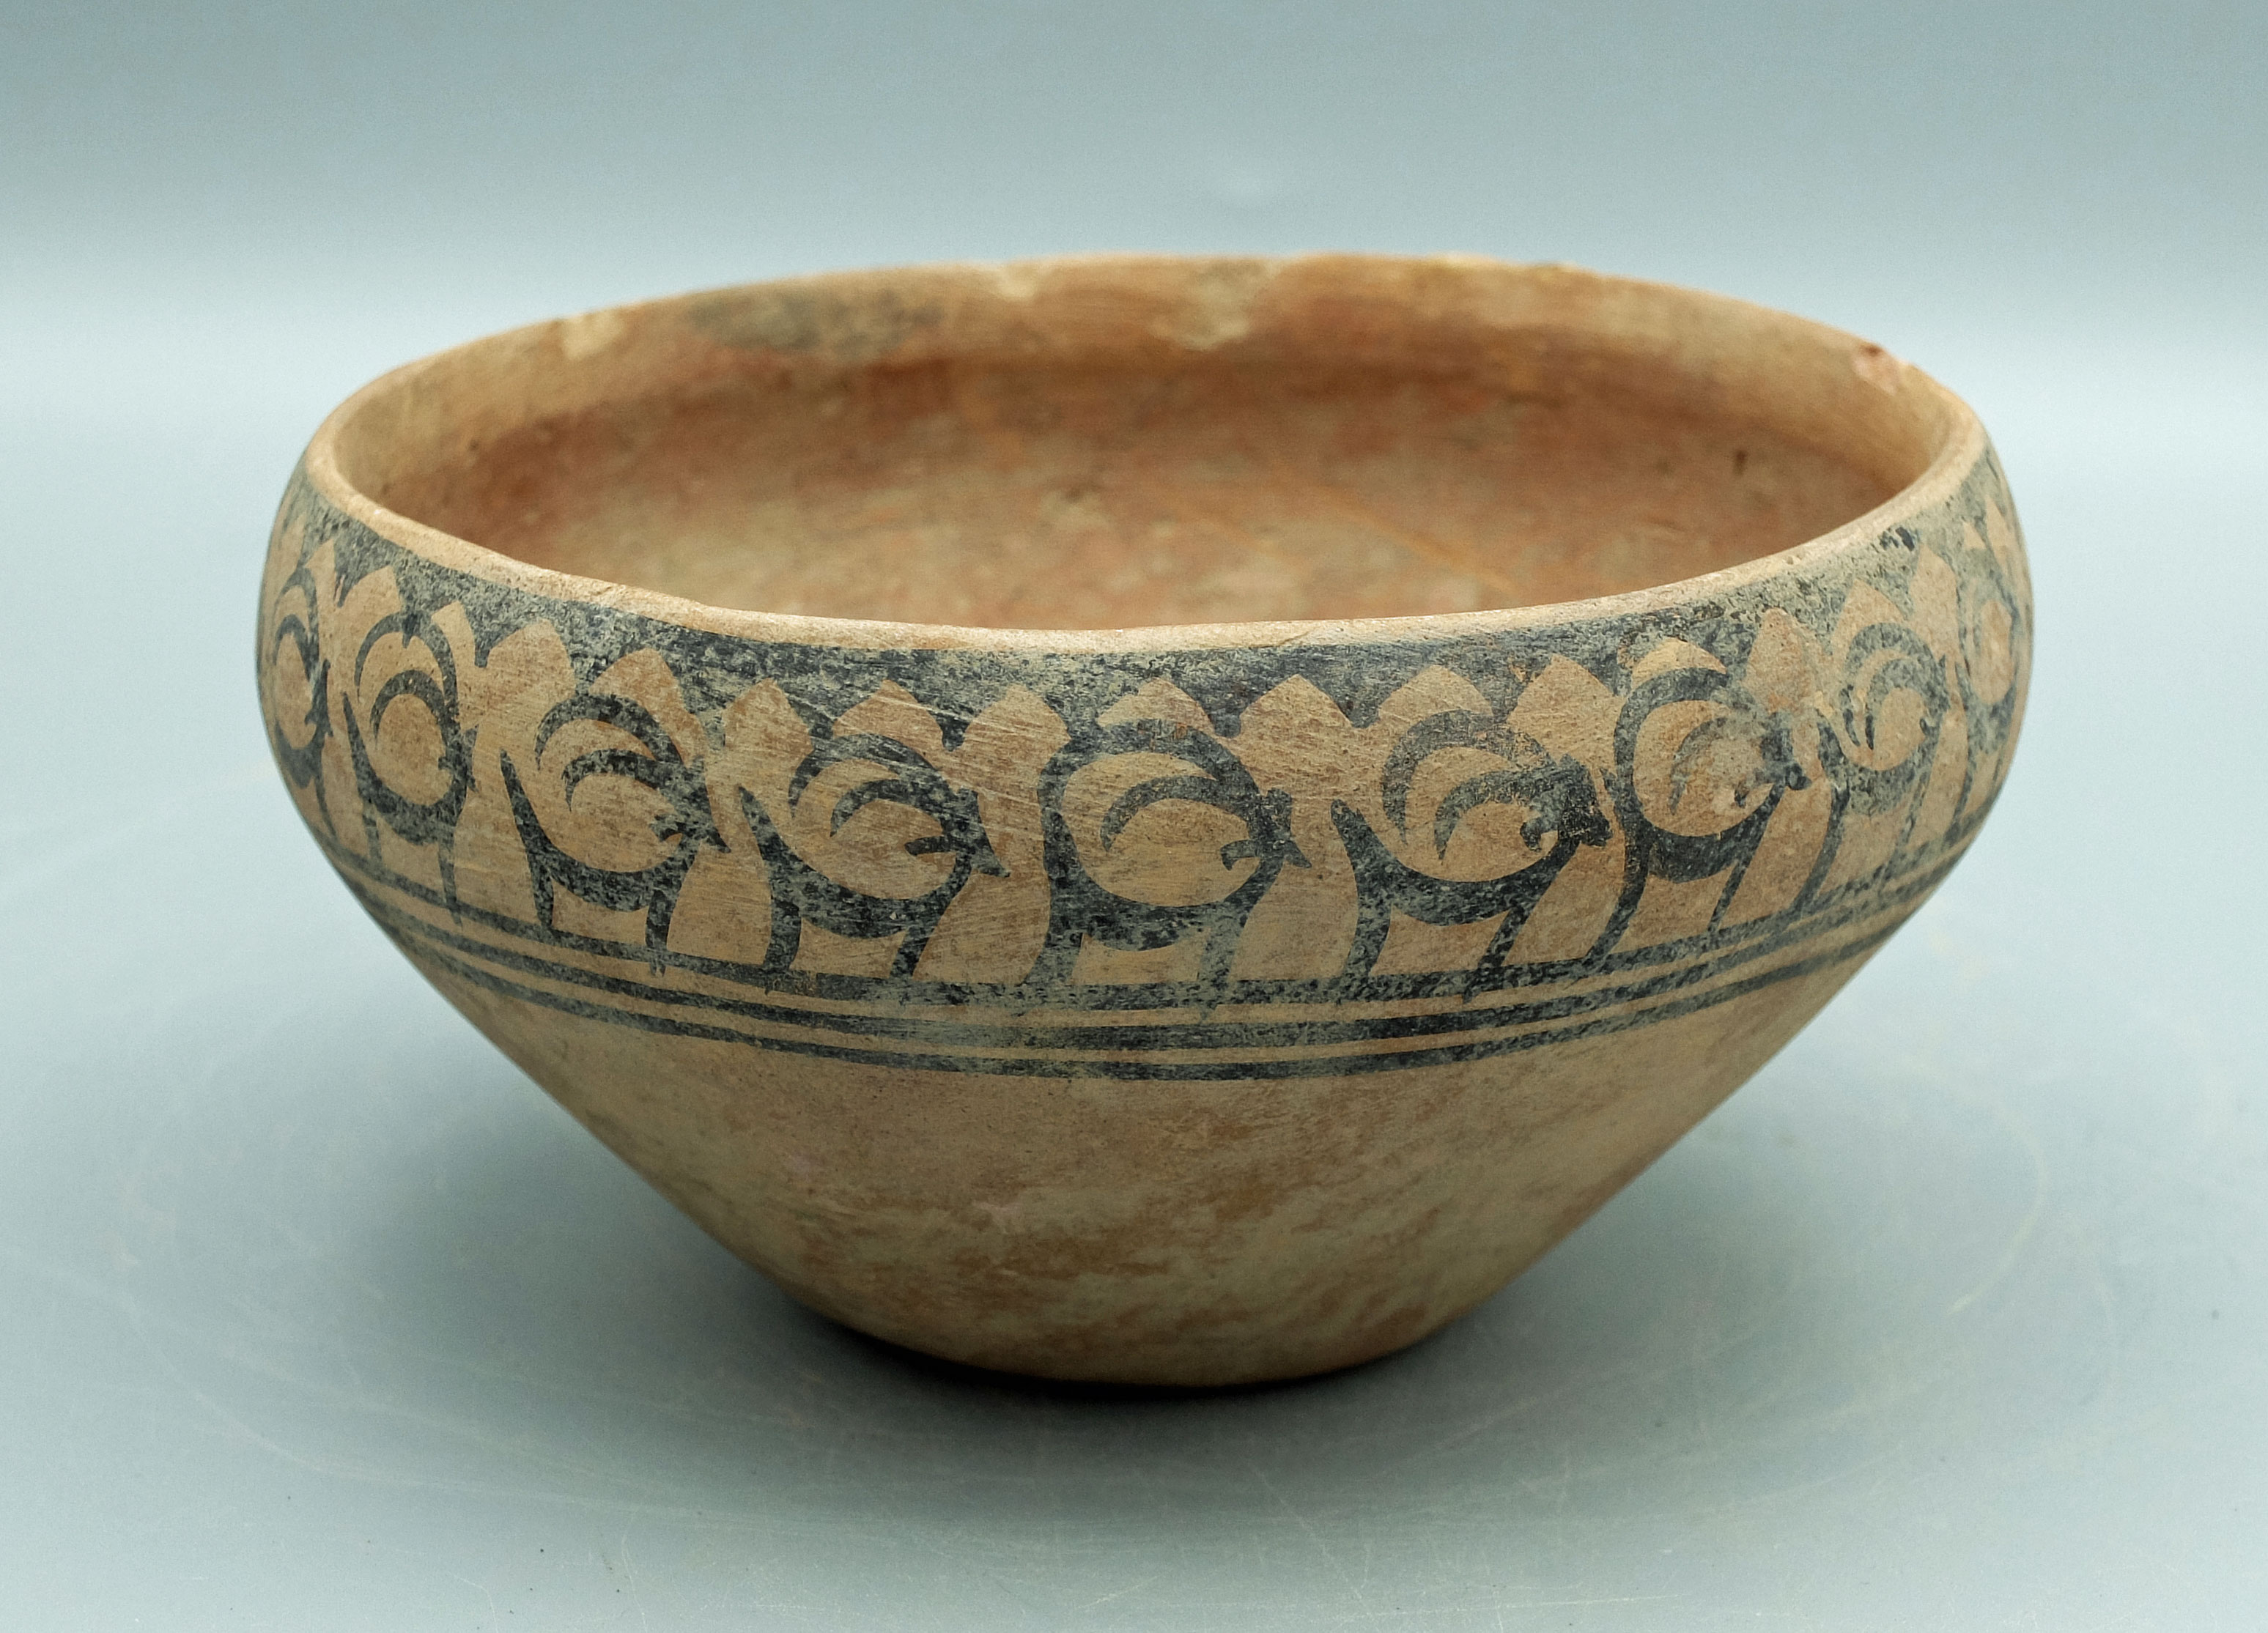 A lovely Harappan bowl from the Indus Valley, ca. 2500 - 1800 BC. This fine example is 5-7/8" in